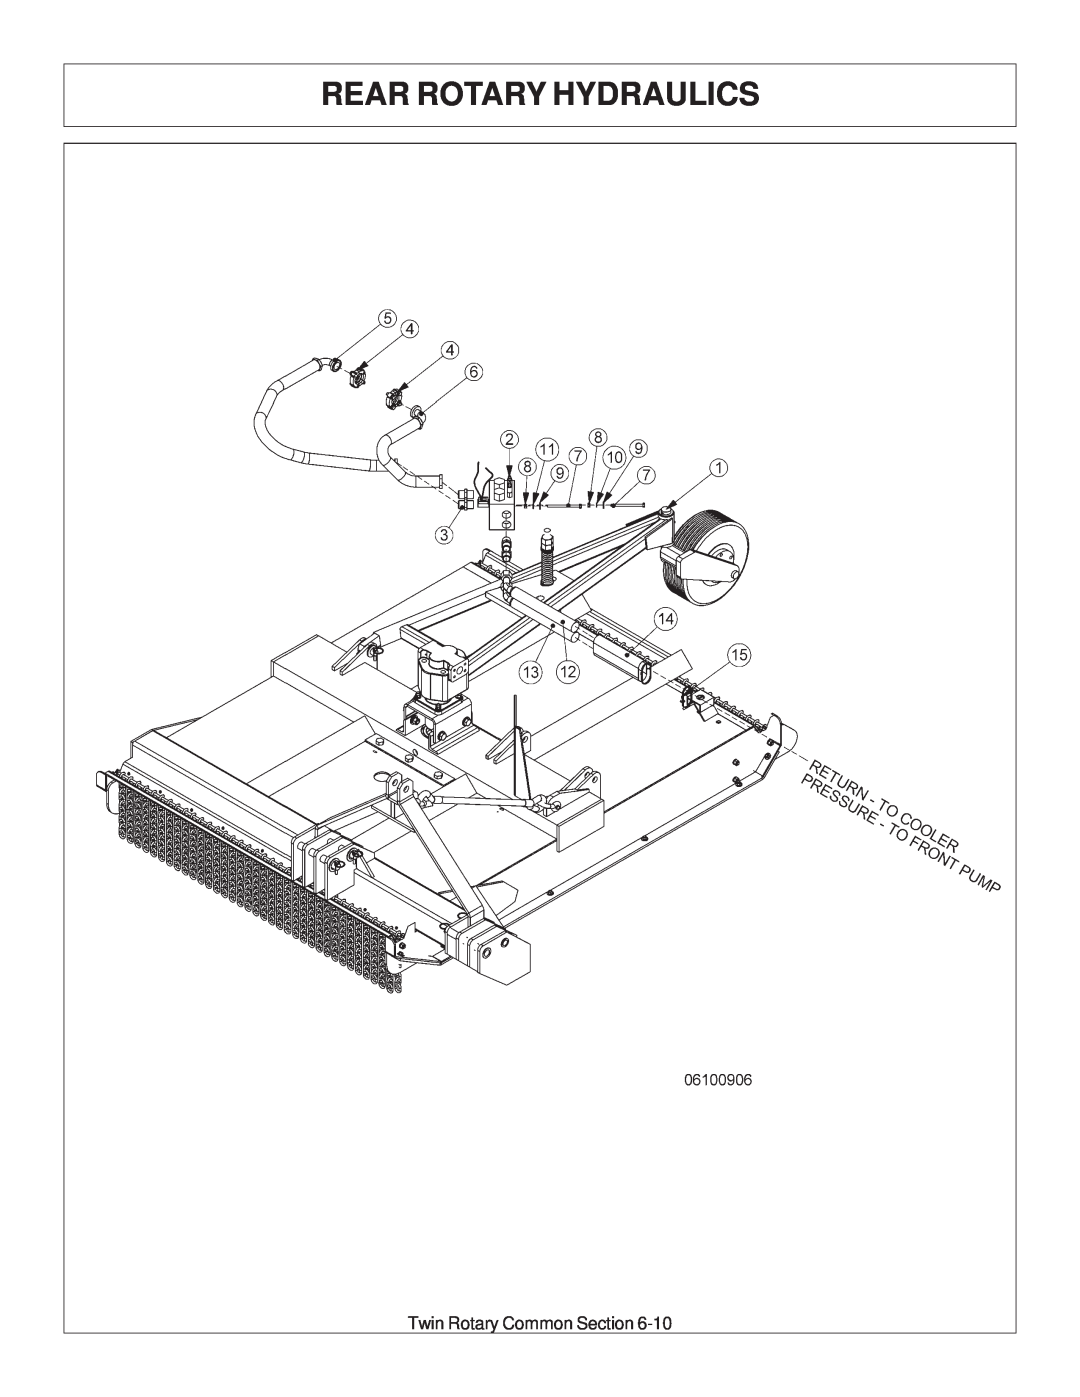 Tiger Products Co., Ltd 6020009 manual Rear Rotary Hydraulics, Twin Rotary Common Section 